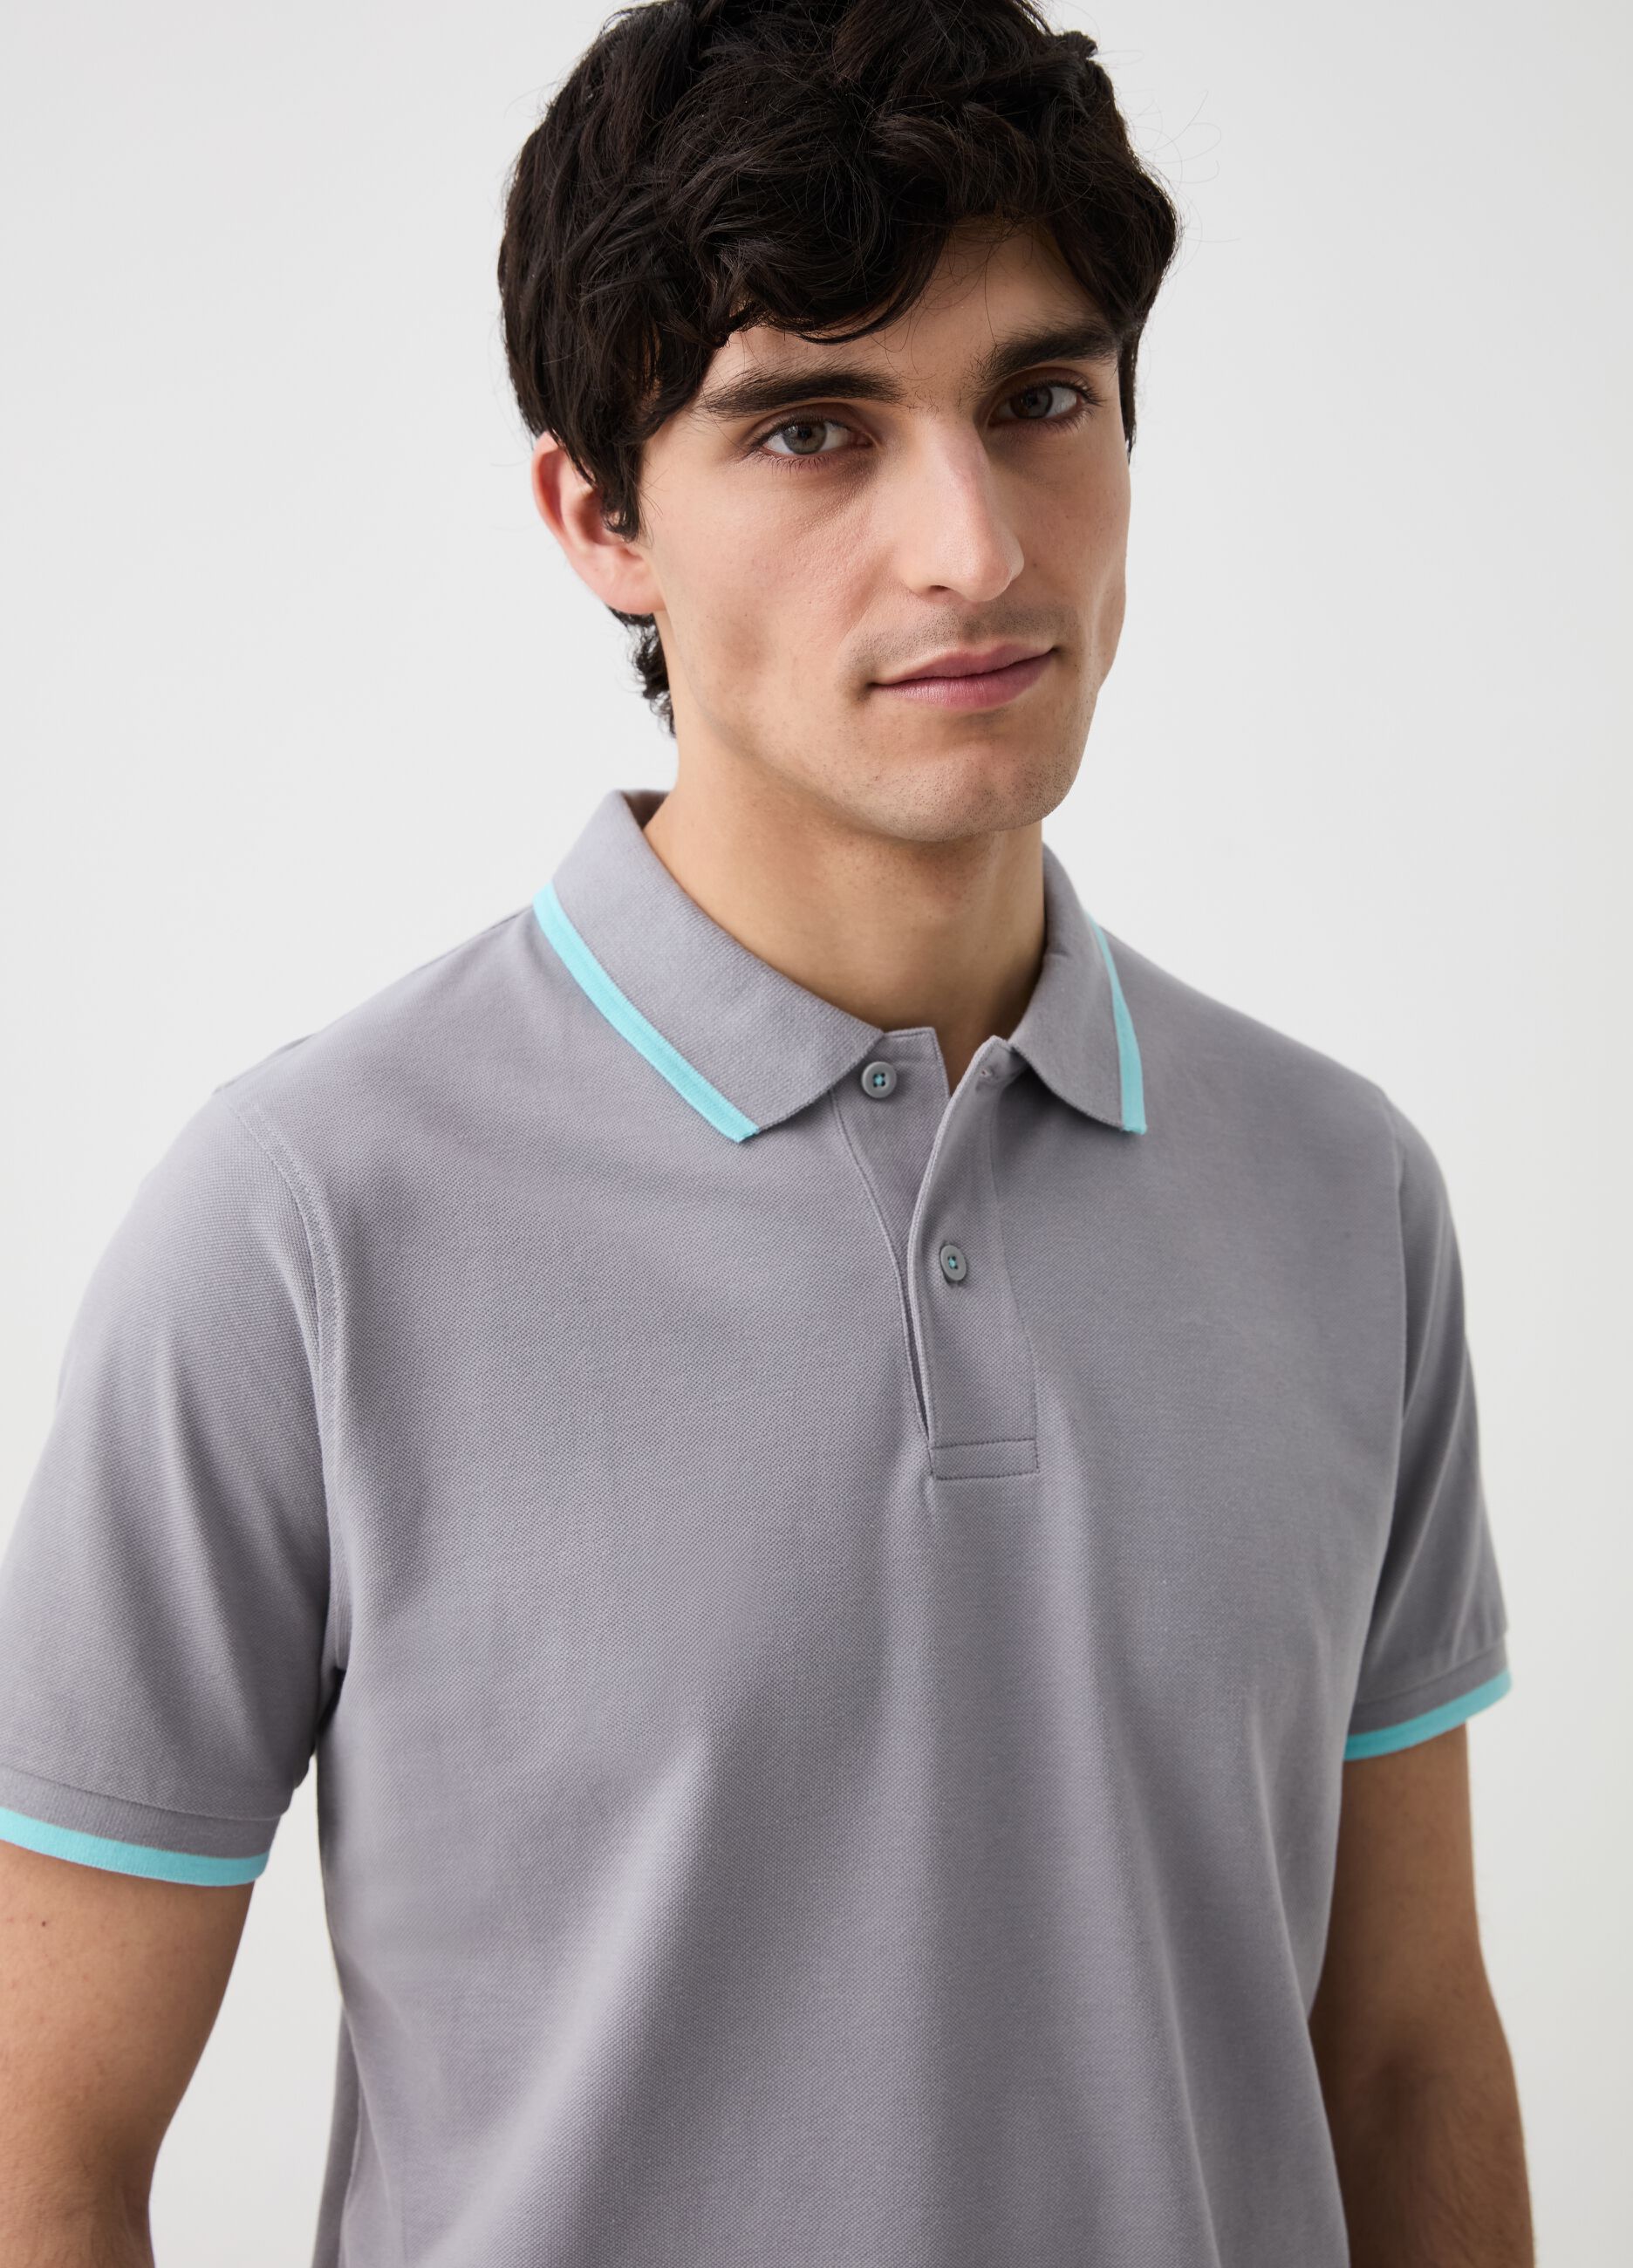 Solid colour polo shirt with fluorescent edging